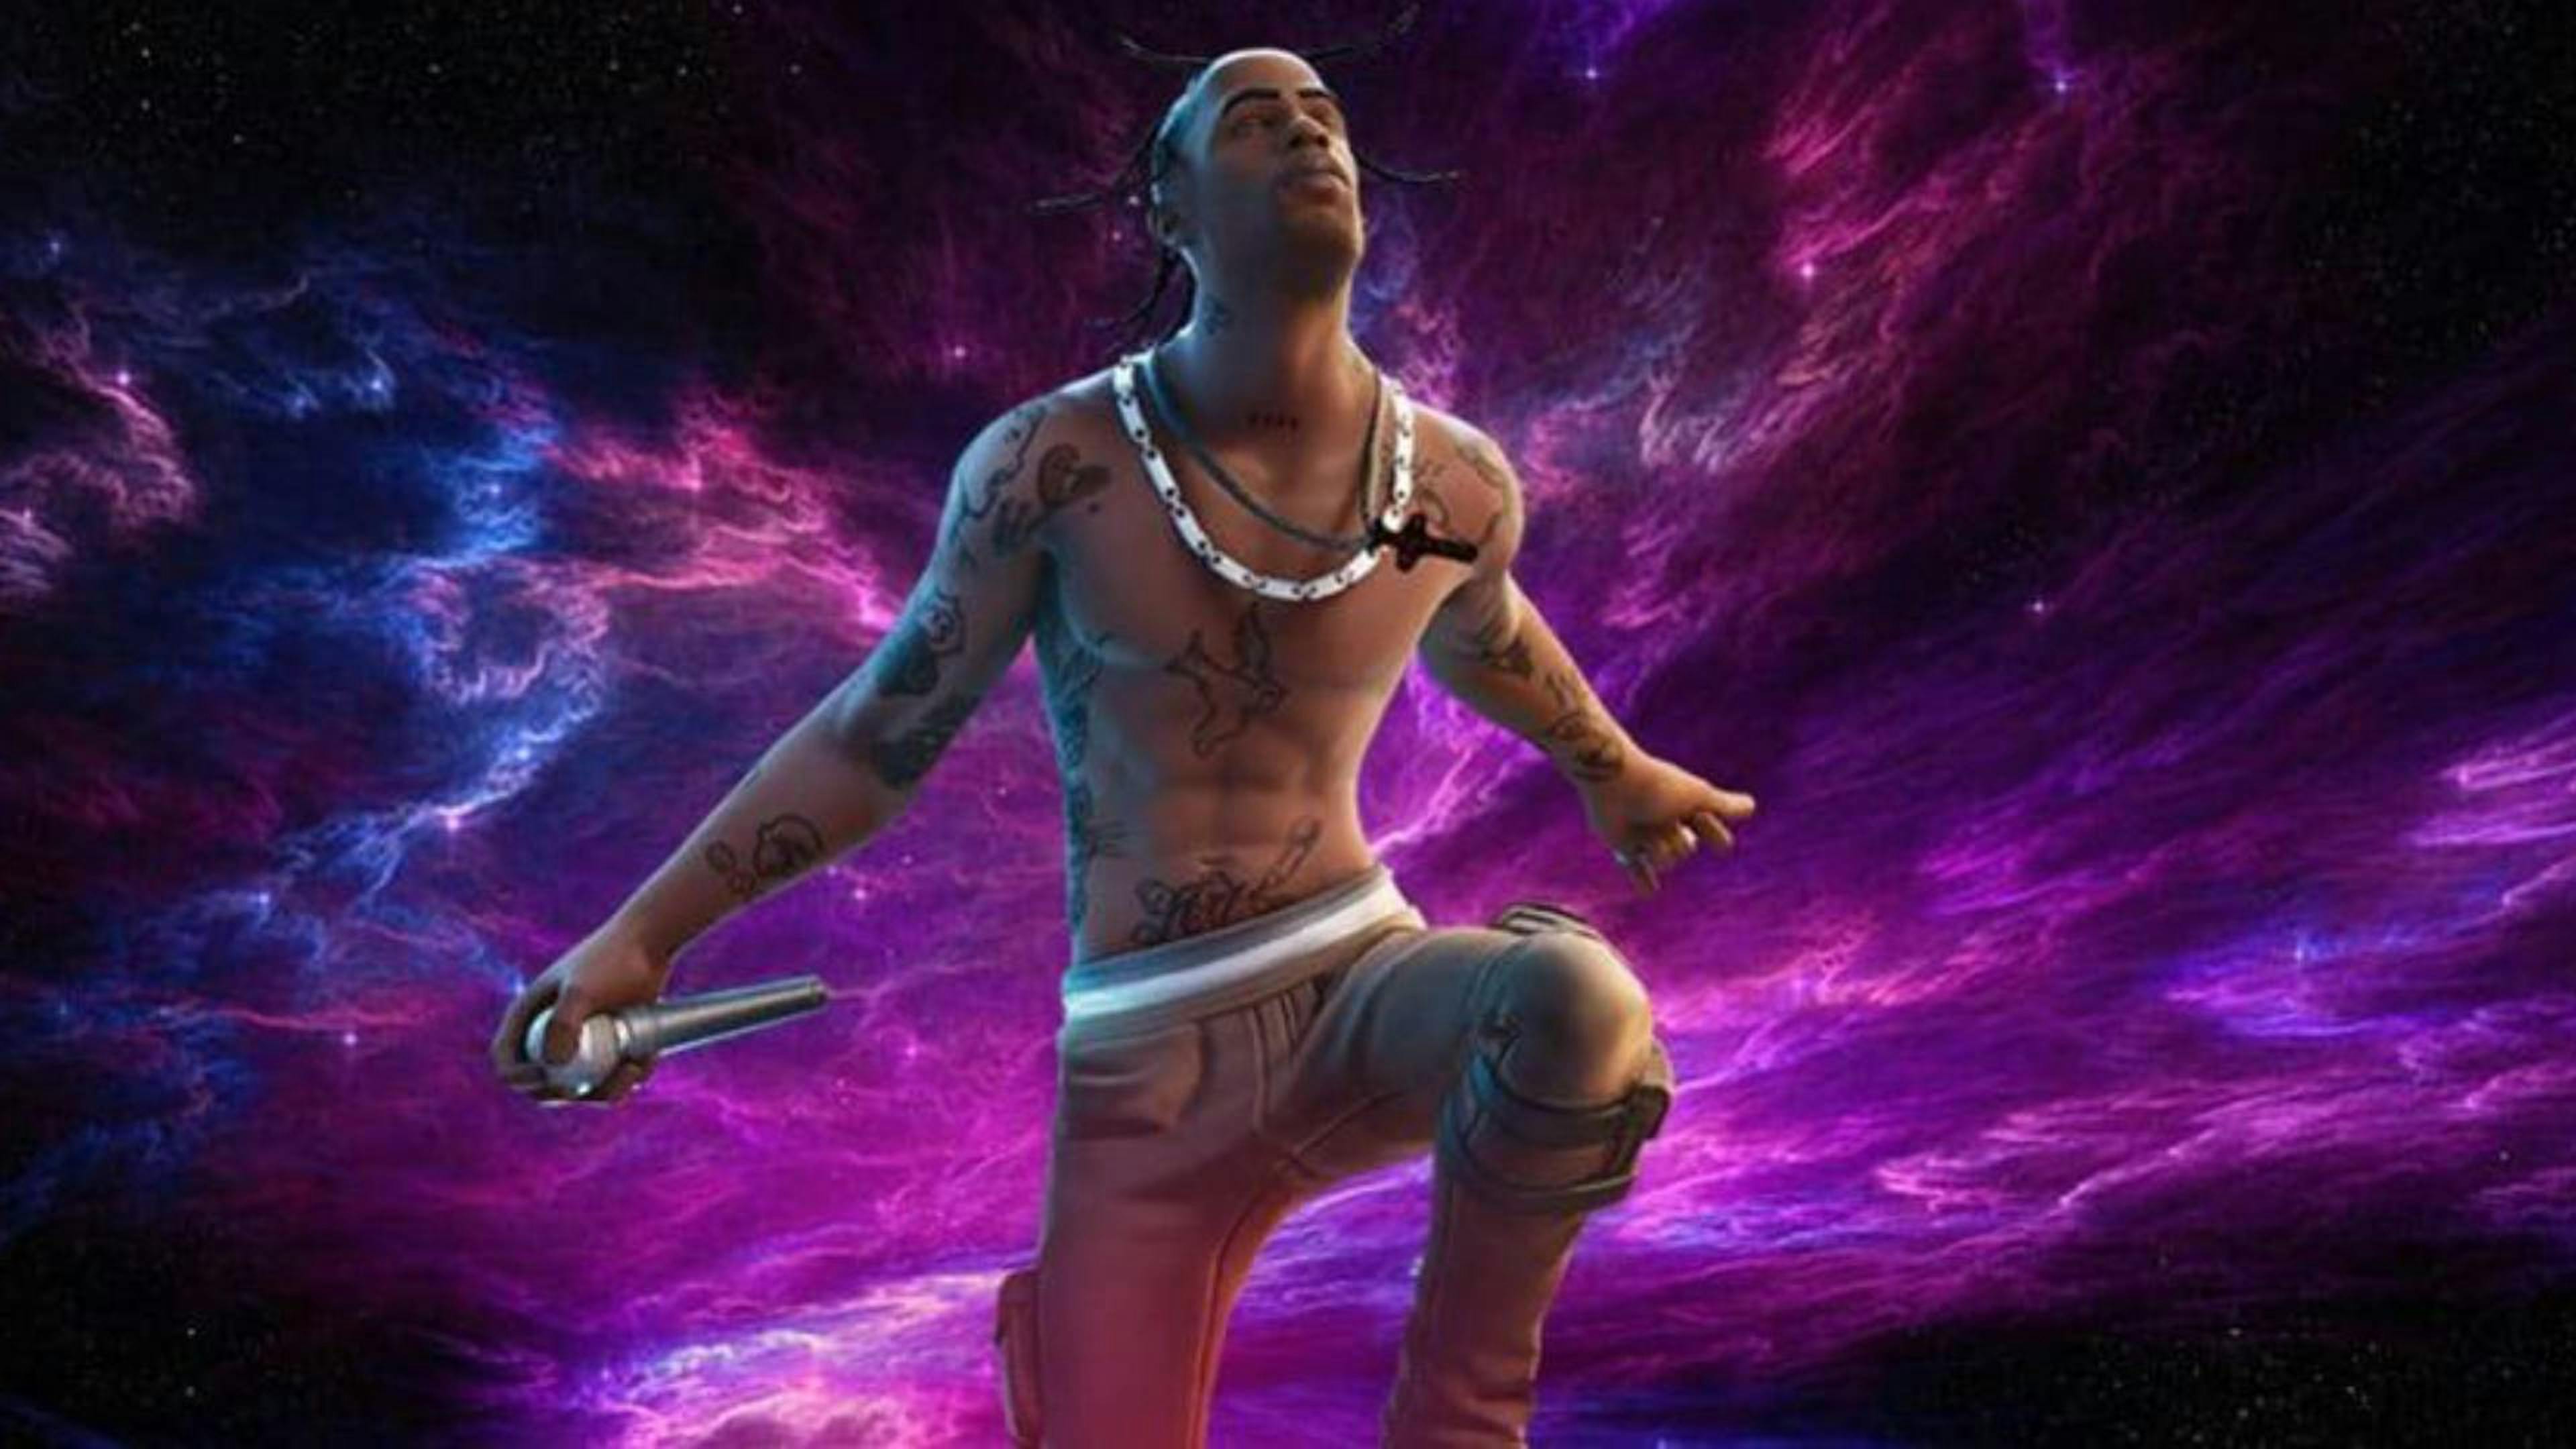 Travis Scott's concert in the game Fortnite can be considered the first major event in the metaverse. The concert was watched by more than 20 million players.